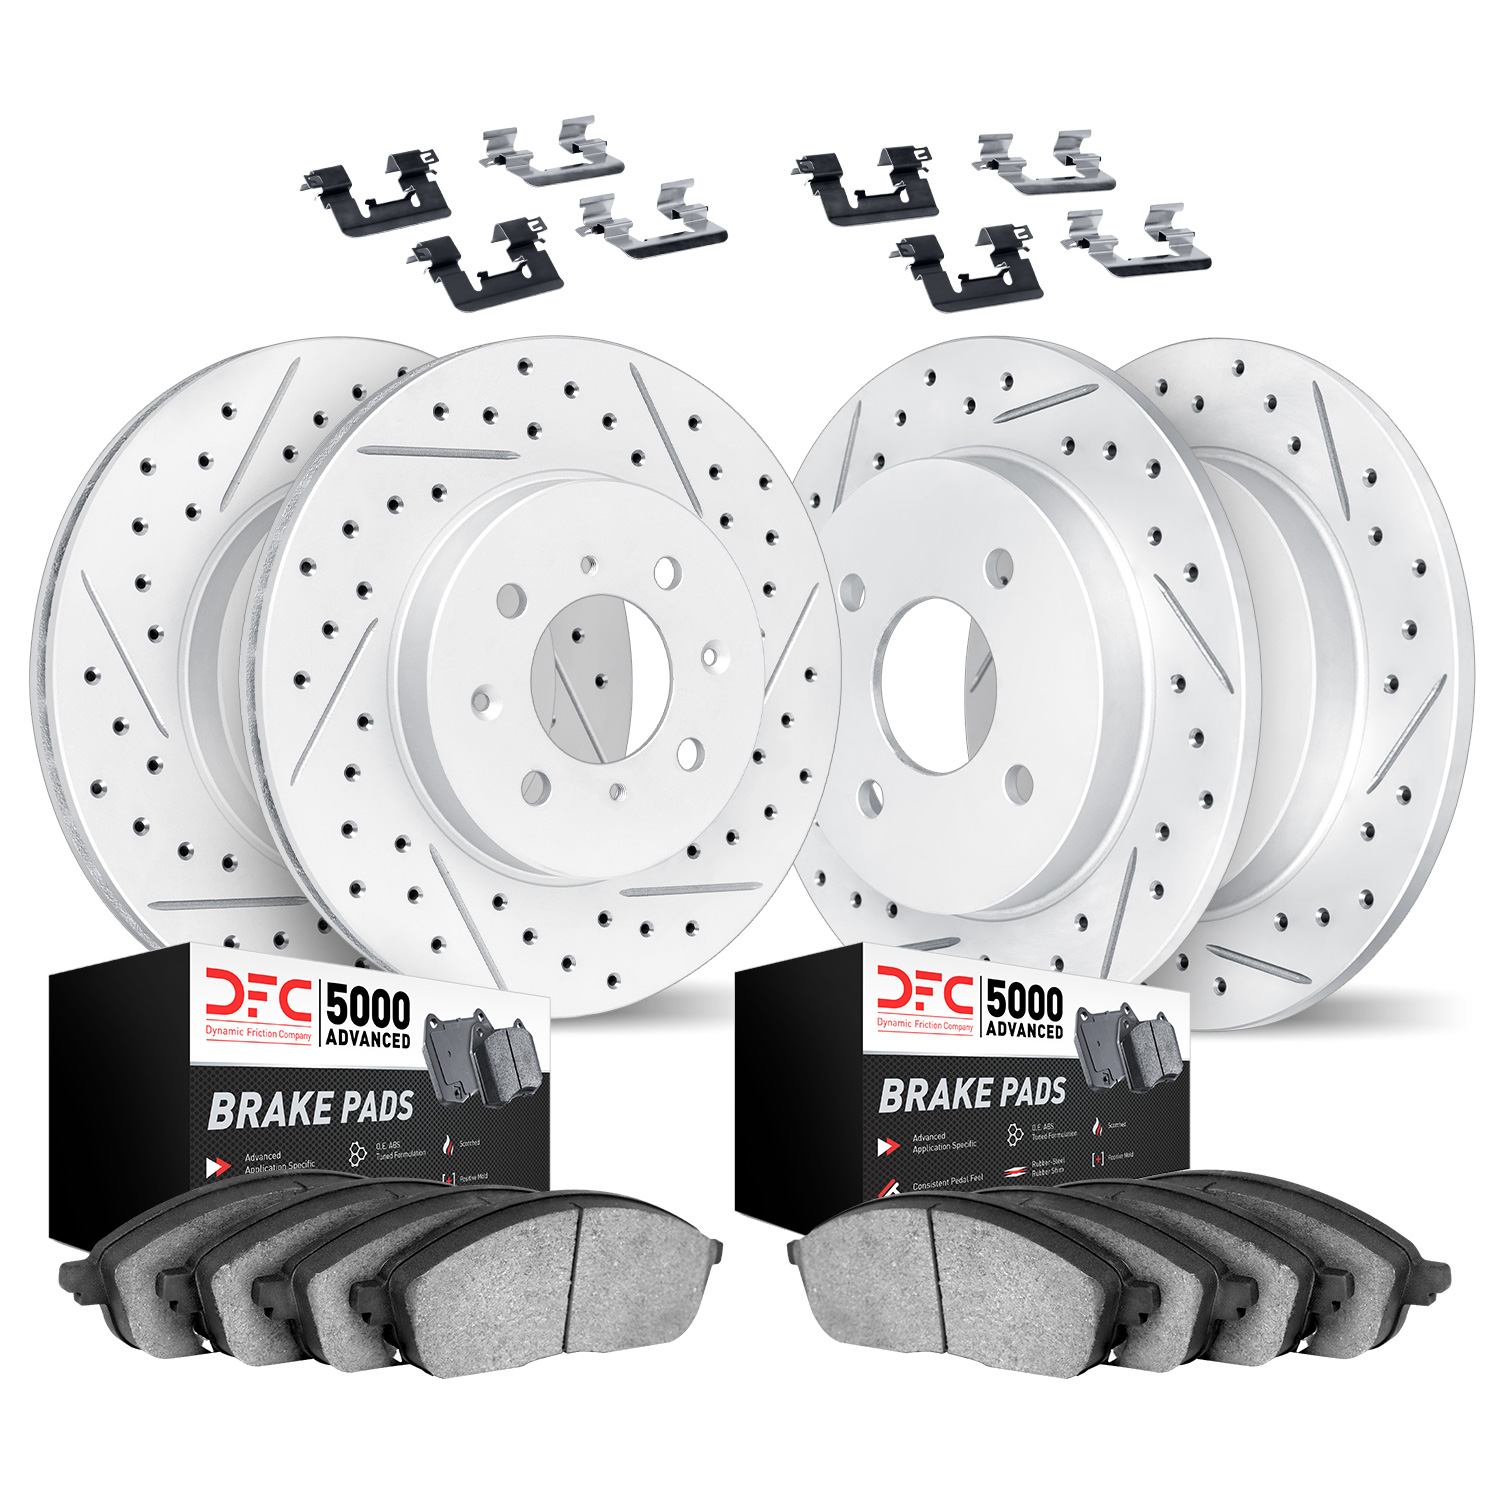 2514-54271 Geoperformance Drilled/Slotted Rotors w/5000 Advanced Brake Pads Kit & Hardware, Fits Select Ford/Lincoln/Mercury/Maz